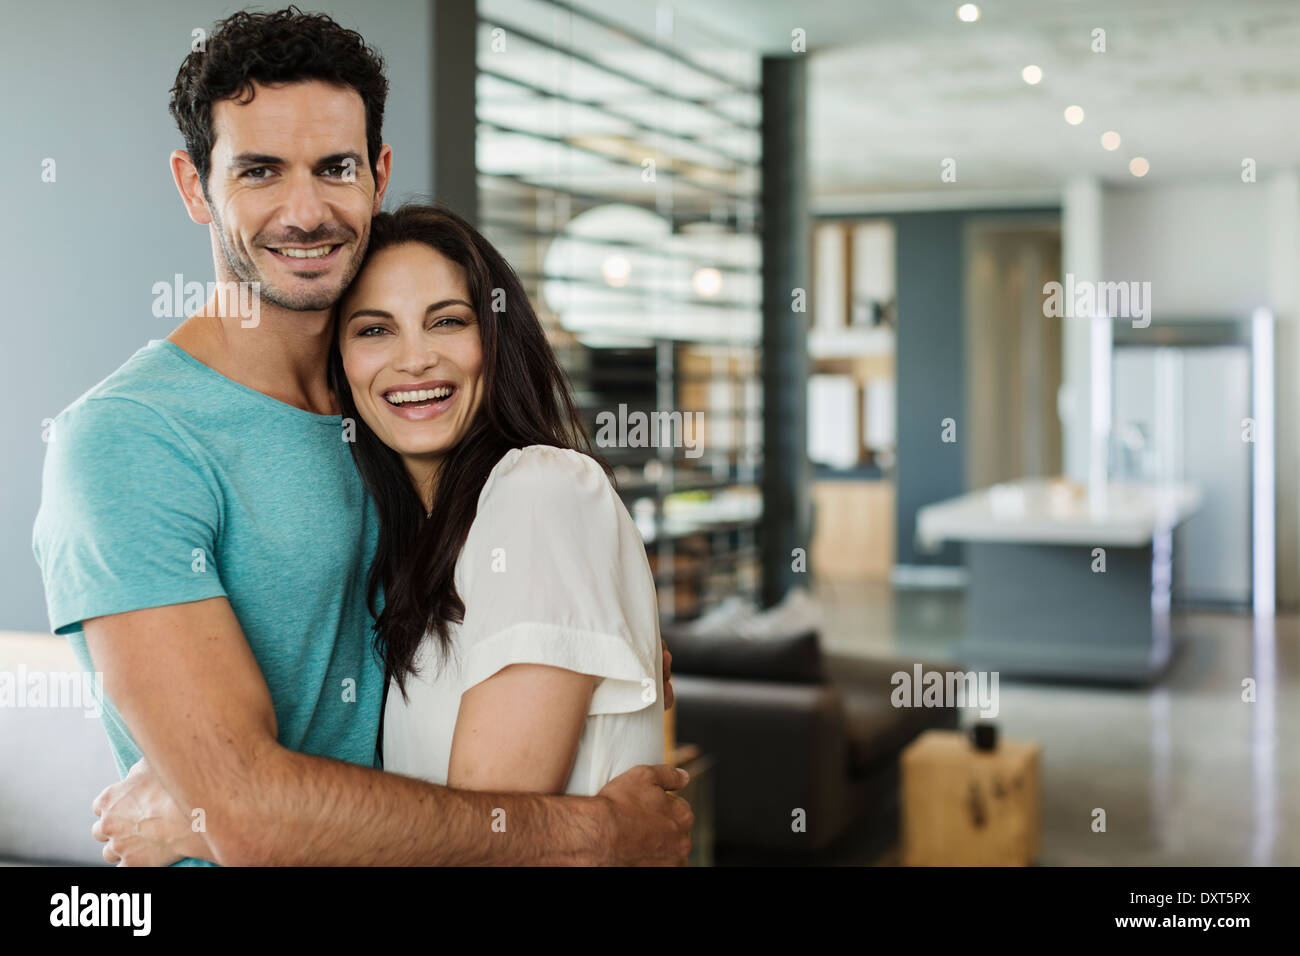 Portrait of happy couple hugging at home Stock Photo